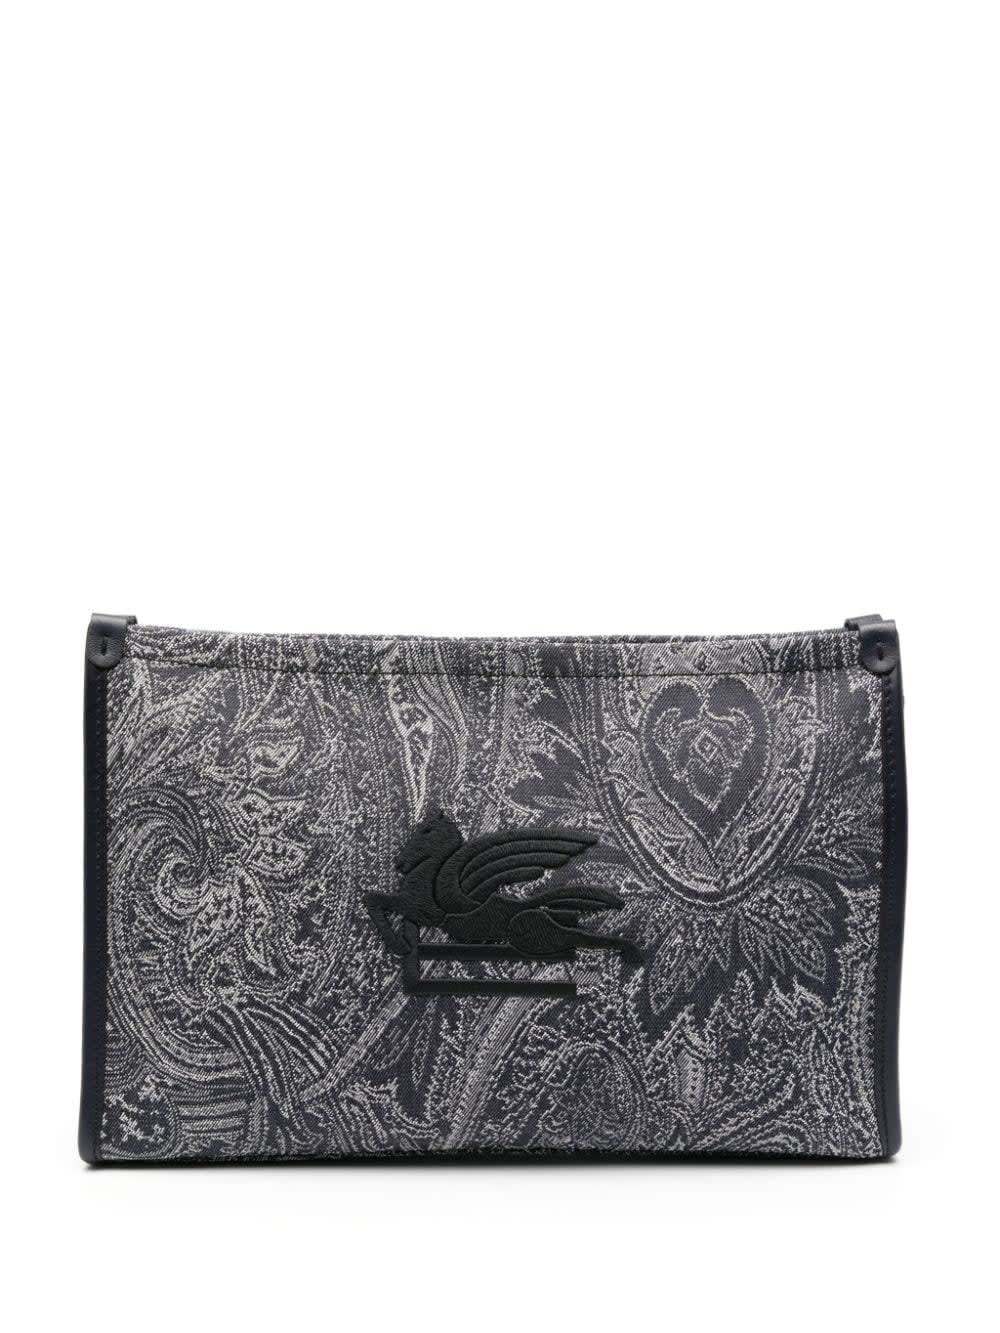 Etro Navy Blue Large Pouch With Paisley Jacquard Motif